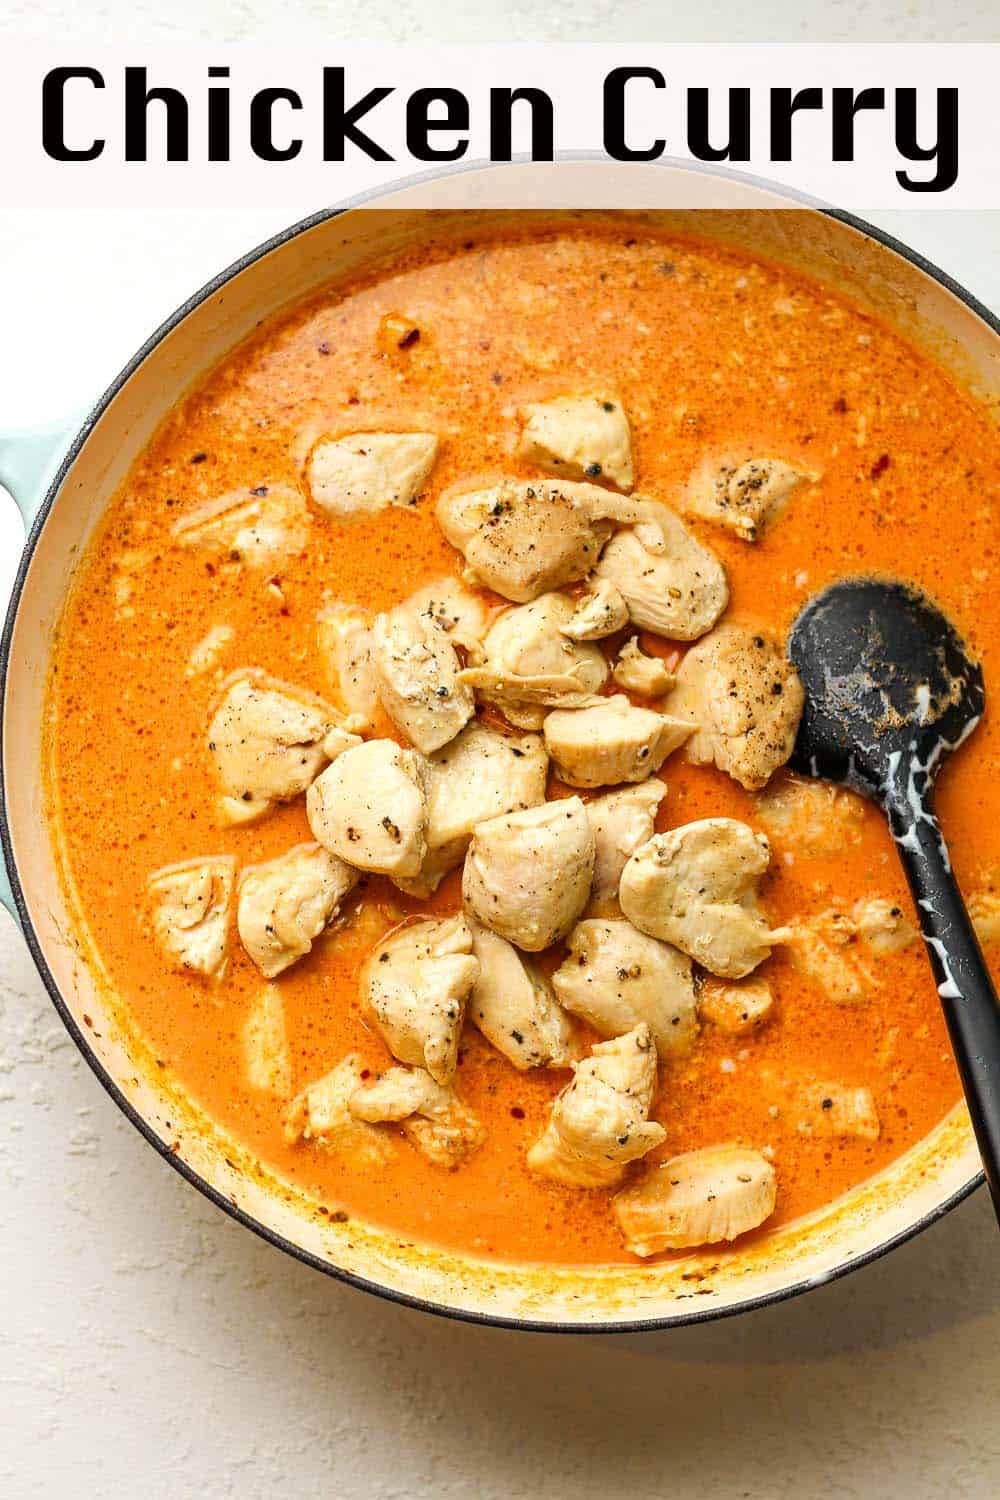 A braiser with red curry sauce and chicken pieces on top.